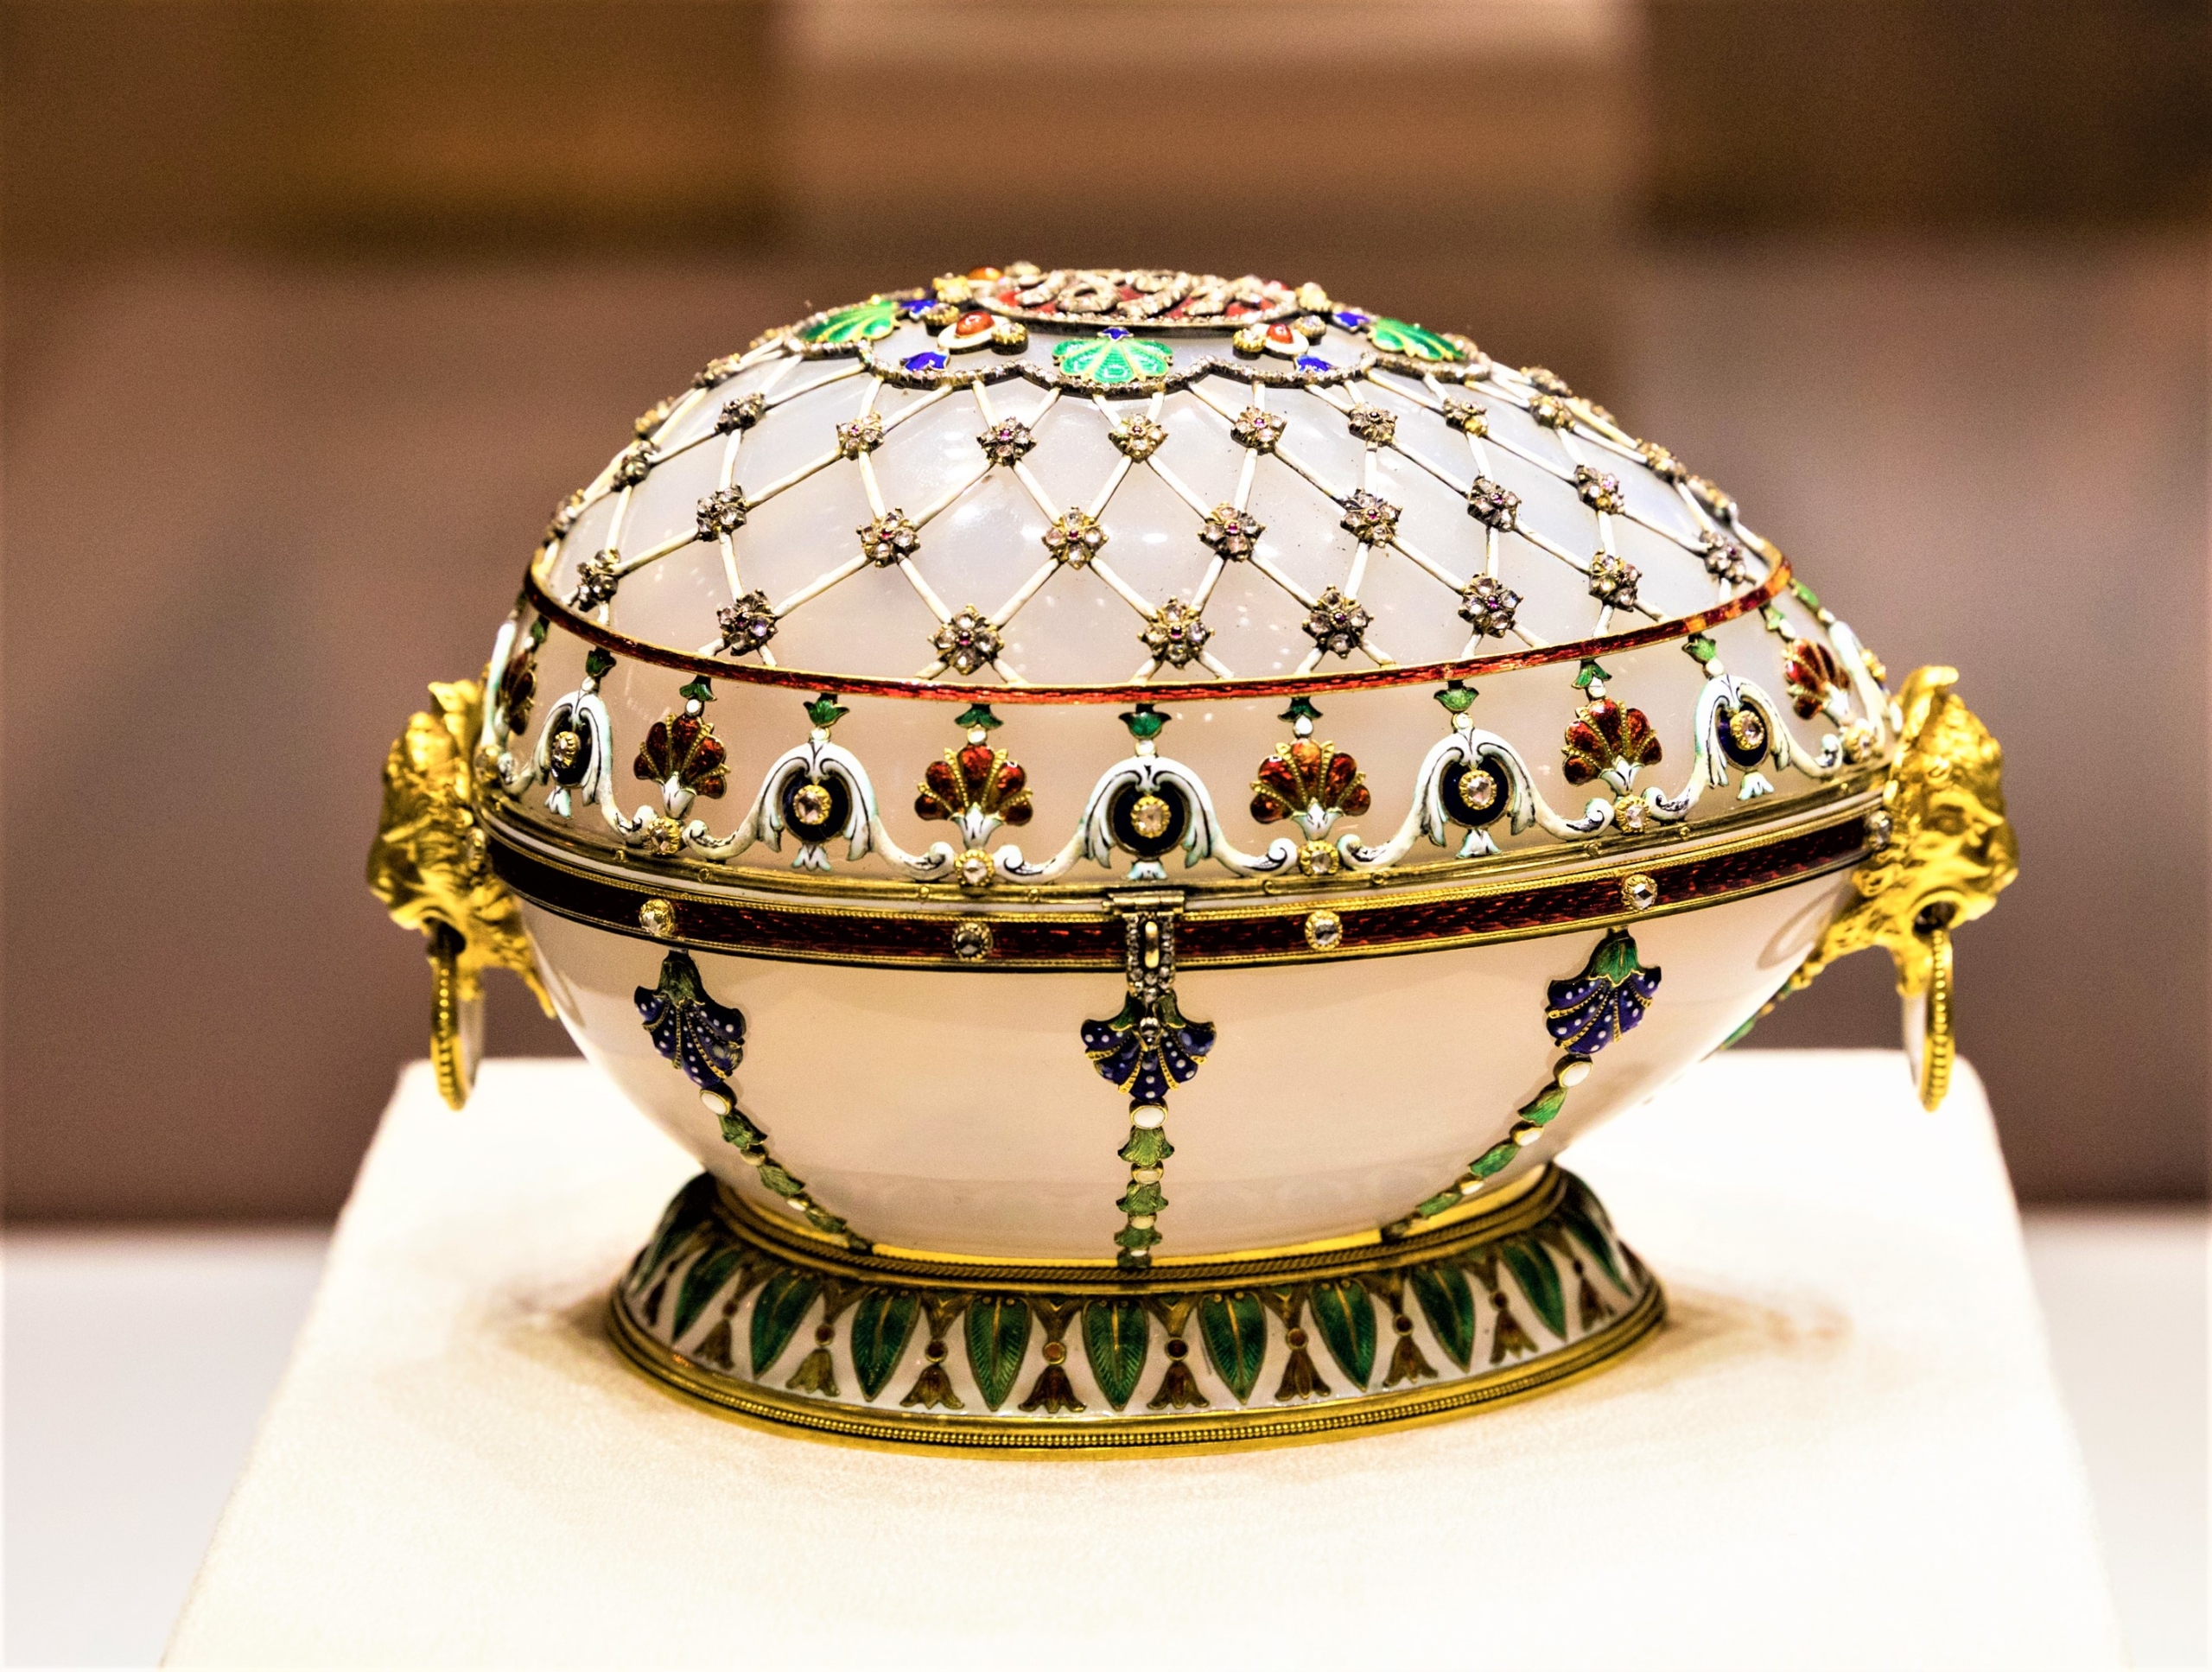 Decorative Faberge Egg white with jewels